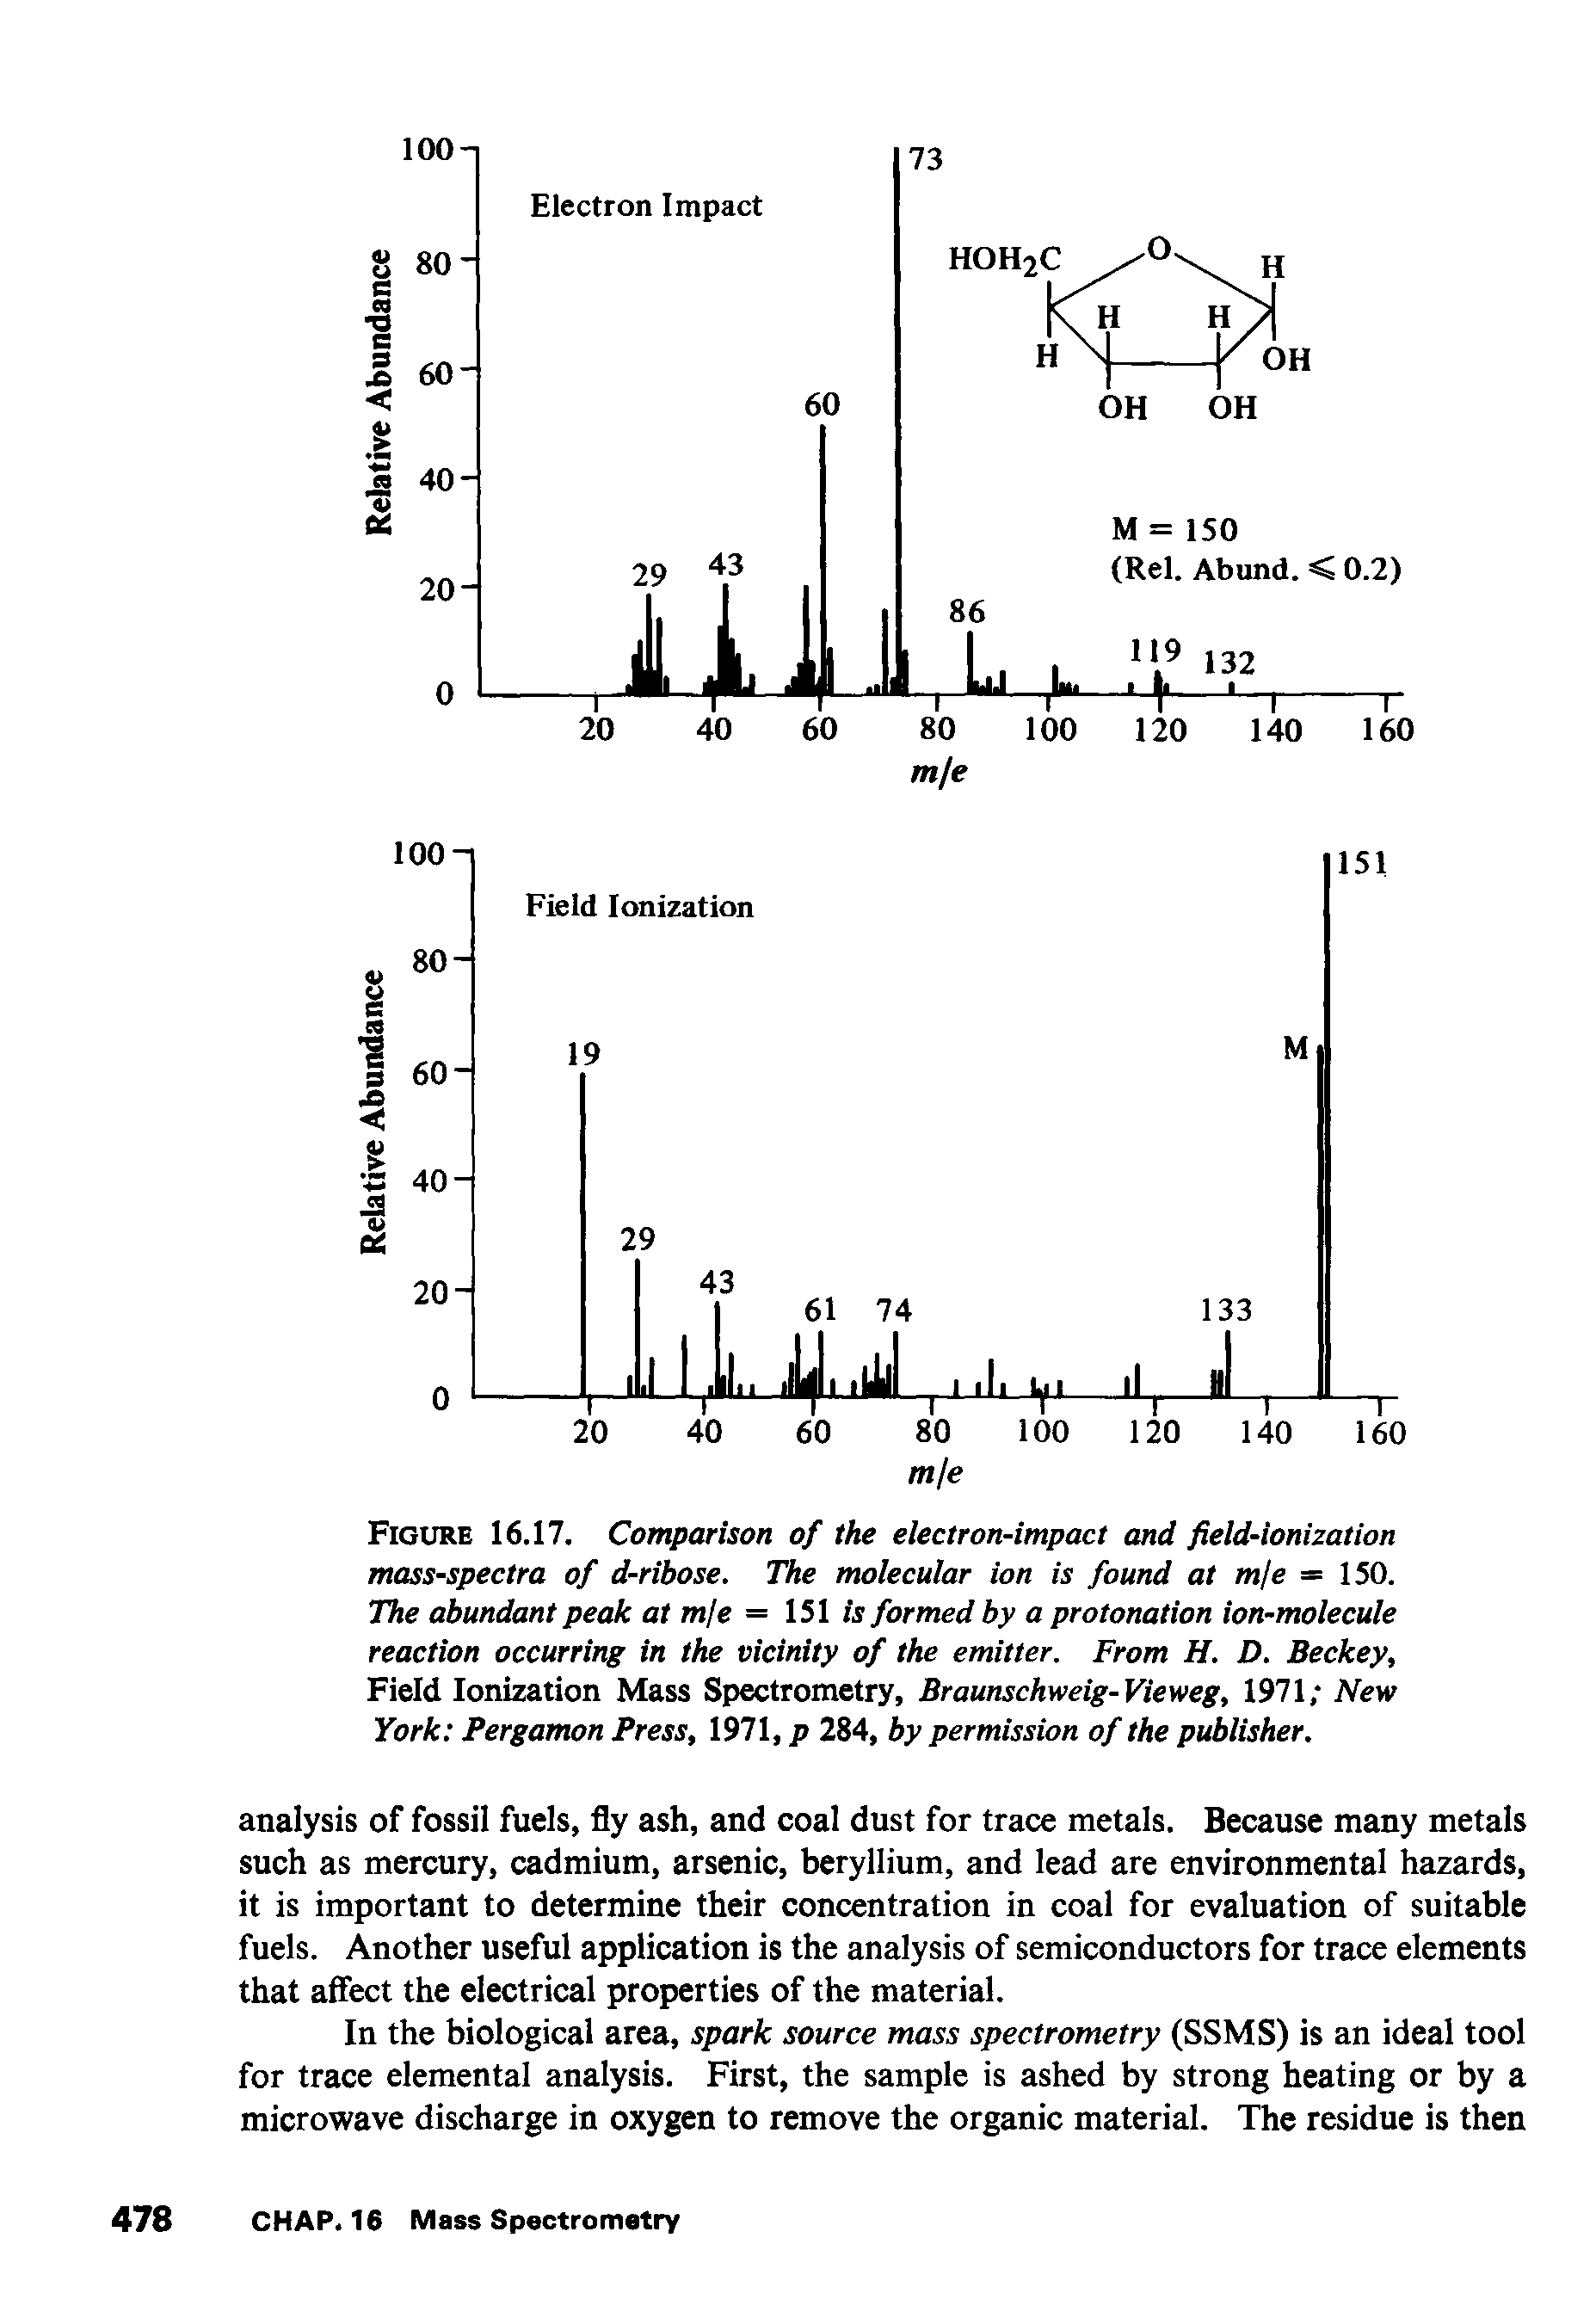 Figure 16.17. Comparison of the electron-impact and field-ionization mass-spectra of d-ribose. The molecular ion is found at mje = 150.